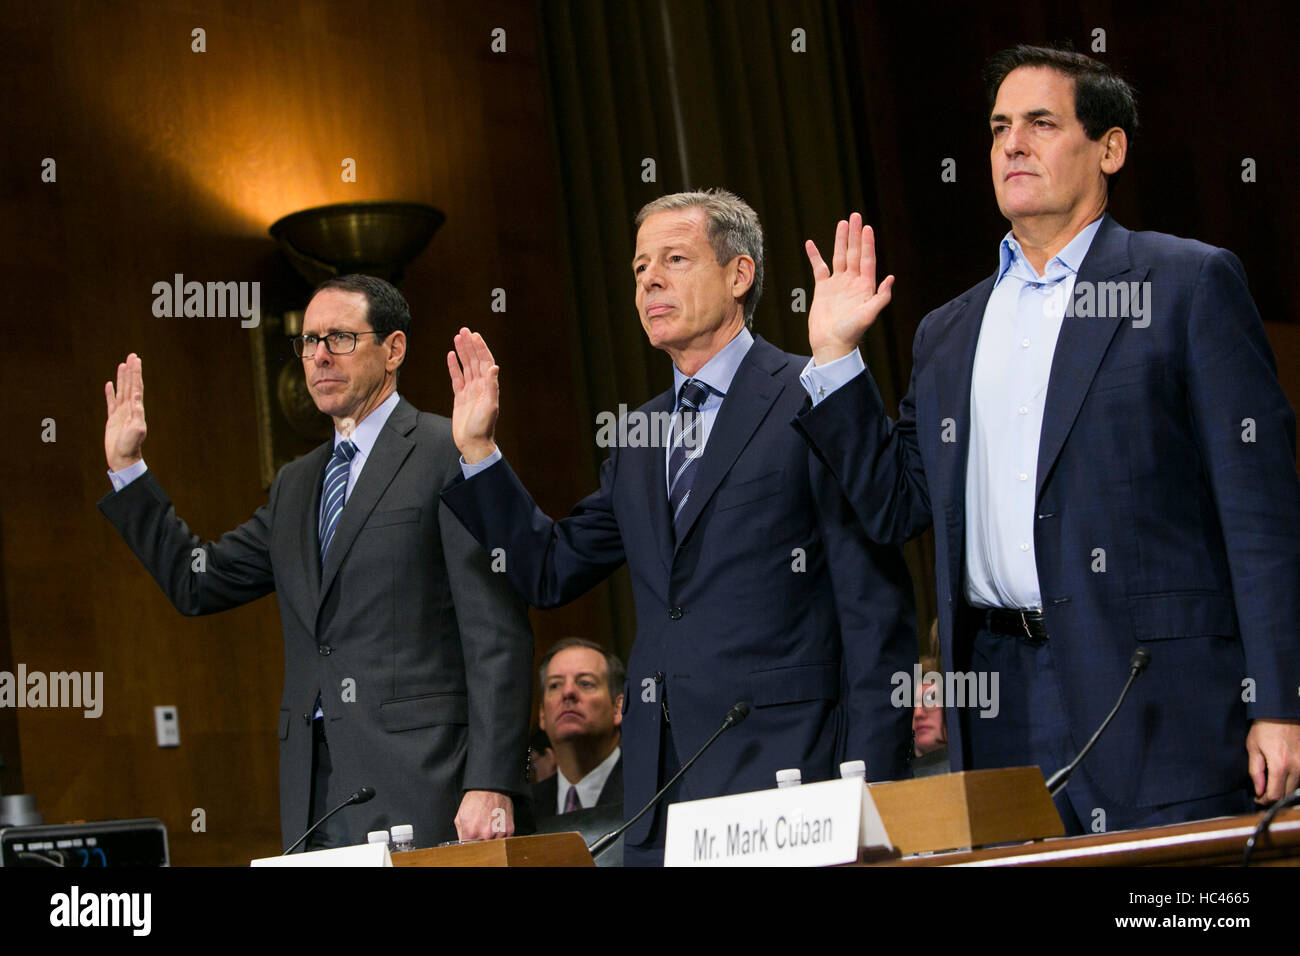 Washington DC, USA. 7th December, 2016. Randall Stephenson, Chairman & CEO of AT&T, left,  Jeffrey Bewkes, Chairman & CEO,Time Warner, center, and Mark Cuban, Chairman, AXS TV, right, are sworn in before the United States Senate Committee on the Judiciary Subcommittee on Antitrust, Competition Policy & Consumer Rights during a hearing on the pending AT&T and Time Warner merger in Washington, D.C. on December 7, 2016. Credit:  Kristoffer Tripplaar/Alamy Live News Stock Photo